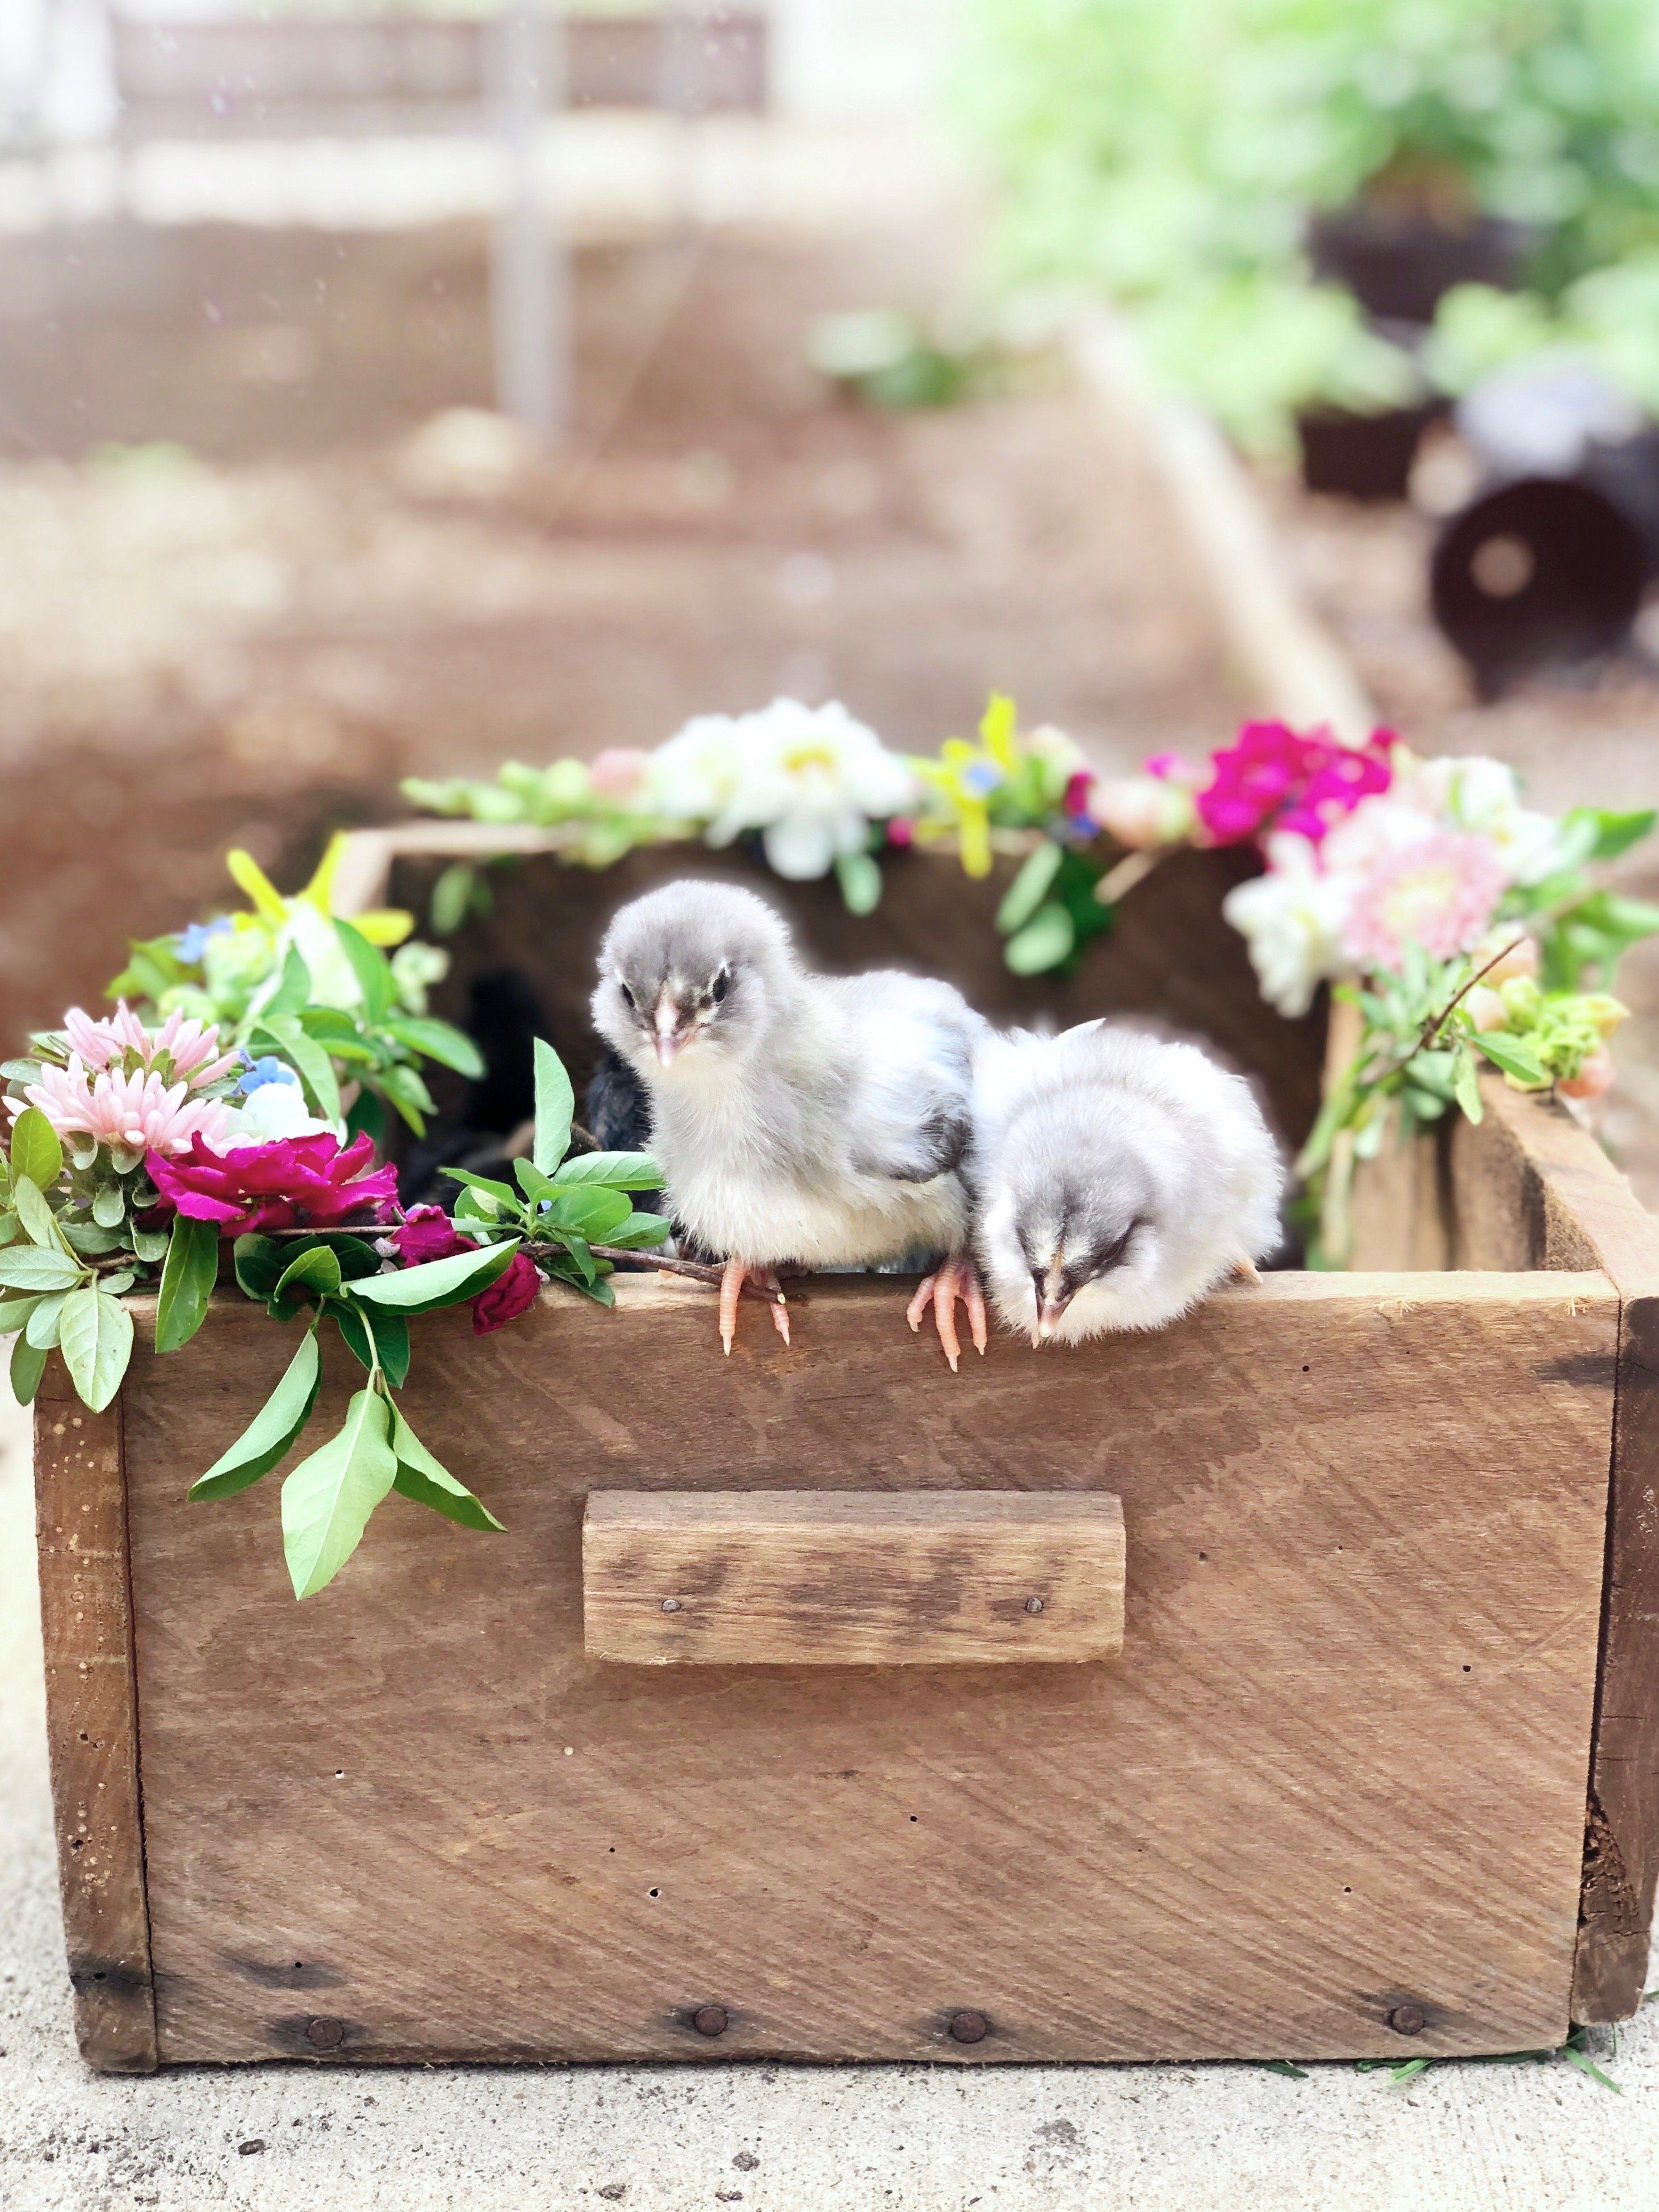 New chicks coming to the farm!